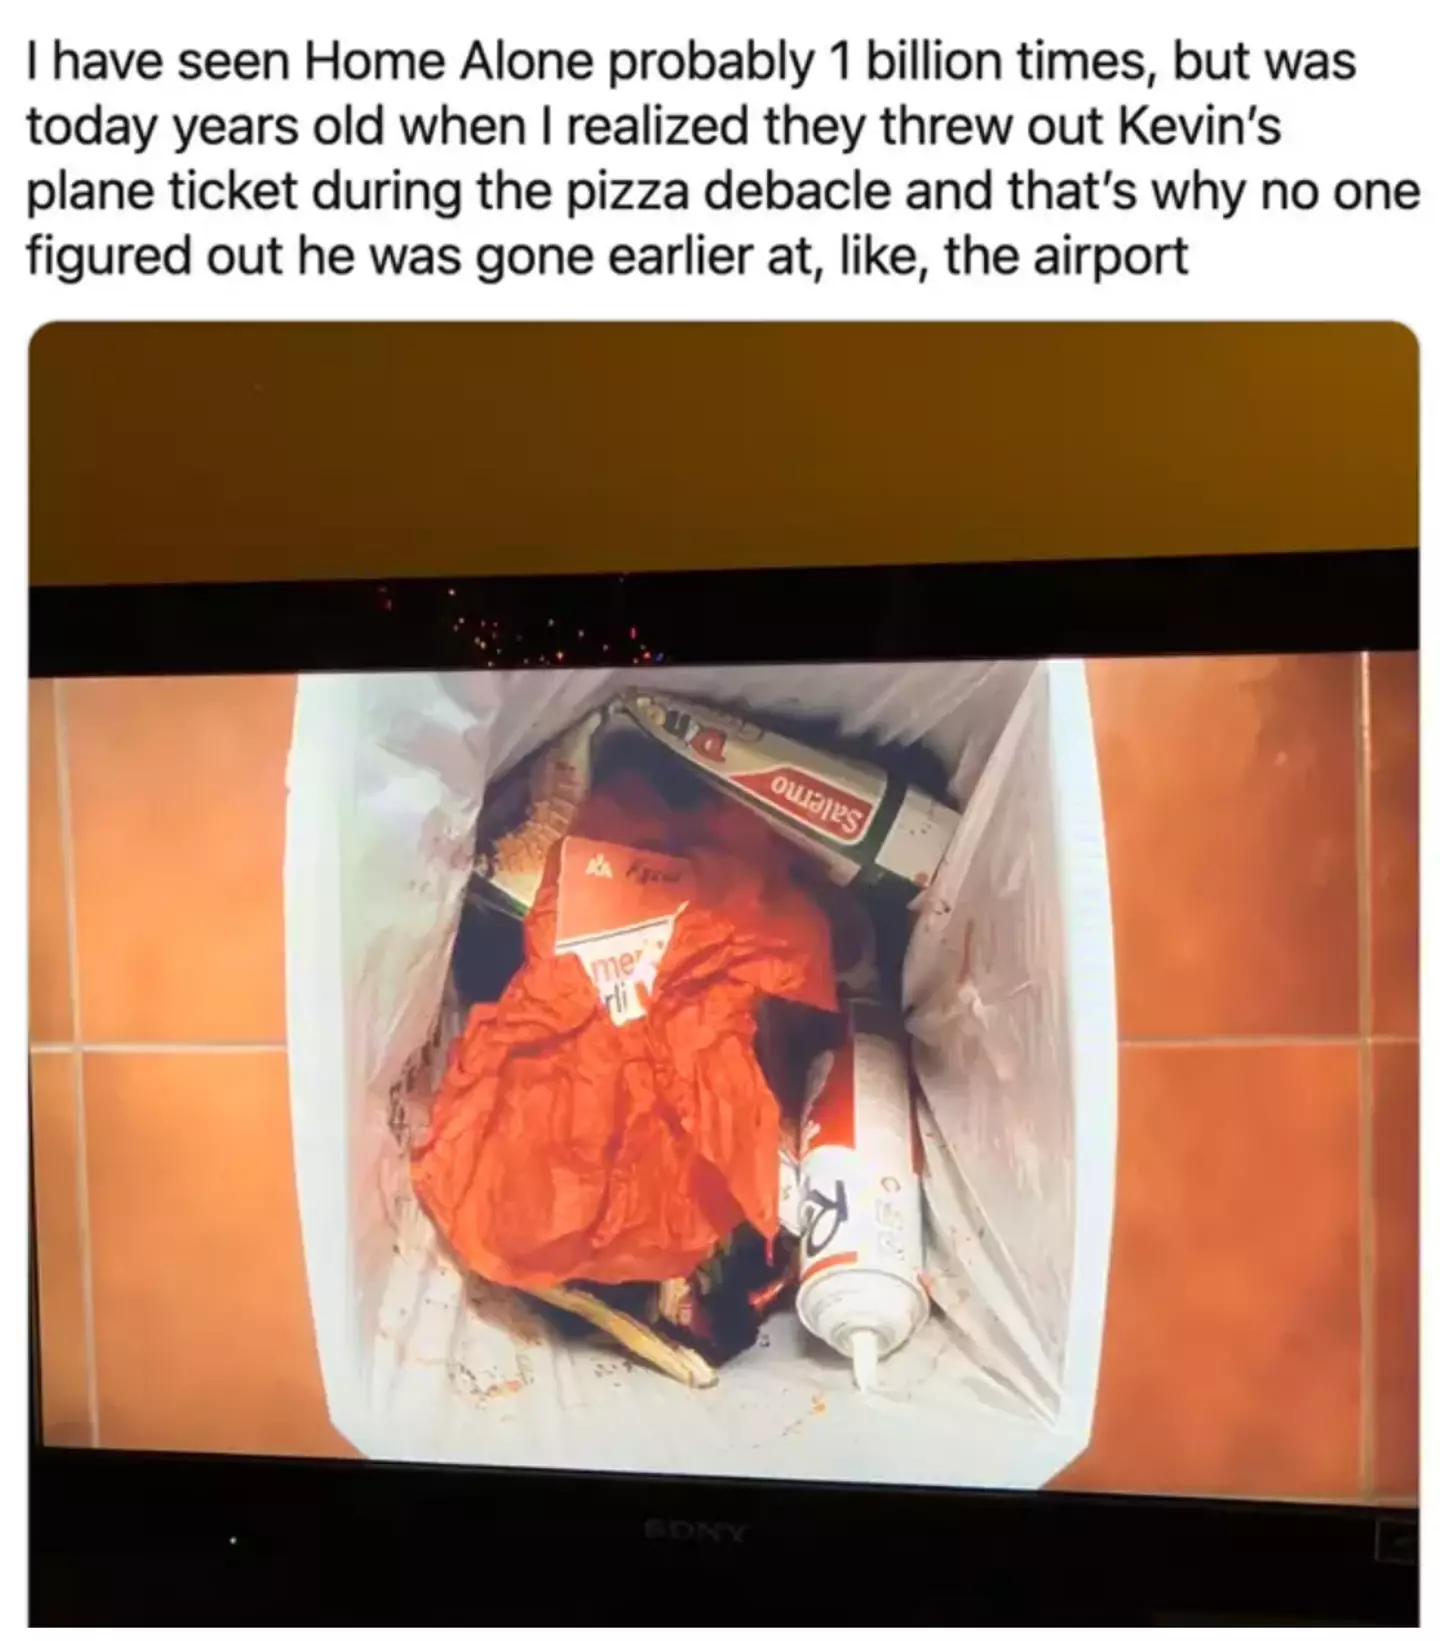 Despite watching Home Alone 'one billion times', one user was 'today years old' when they clocked Kevin's plane ticket ends up in the bin.